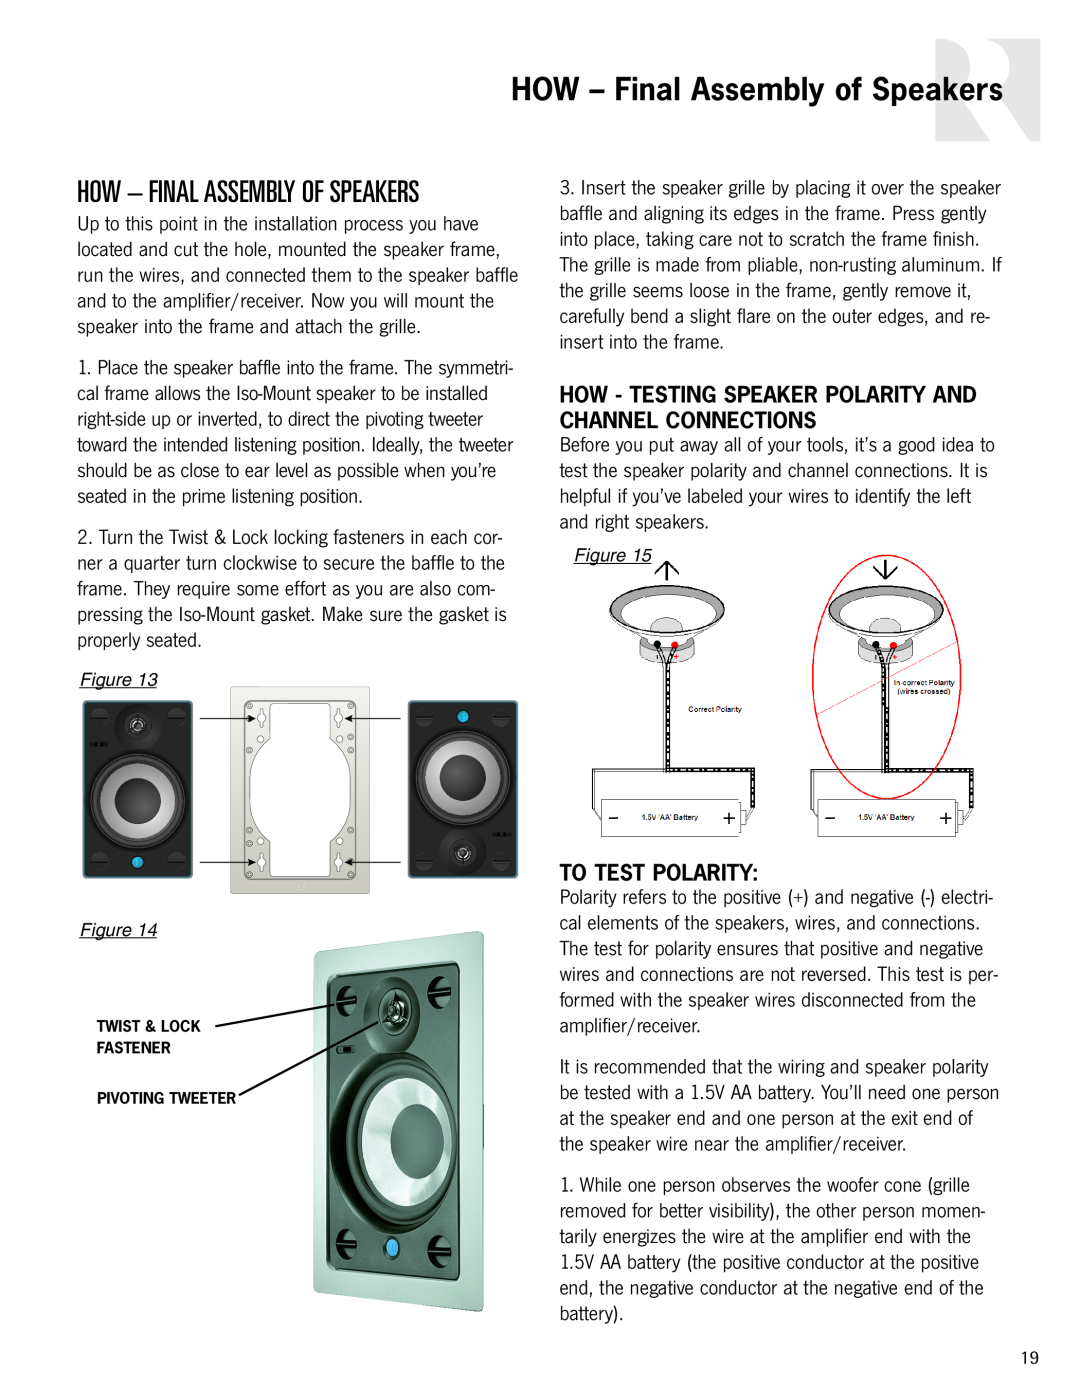 Russound Advantage Series owner manual HOW - Final Assembly of Speakers, How - Final Assembly Of Speakers, To Test Polarity 